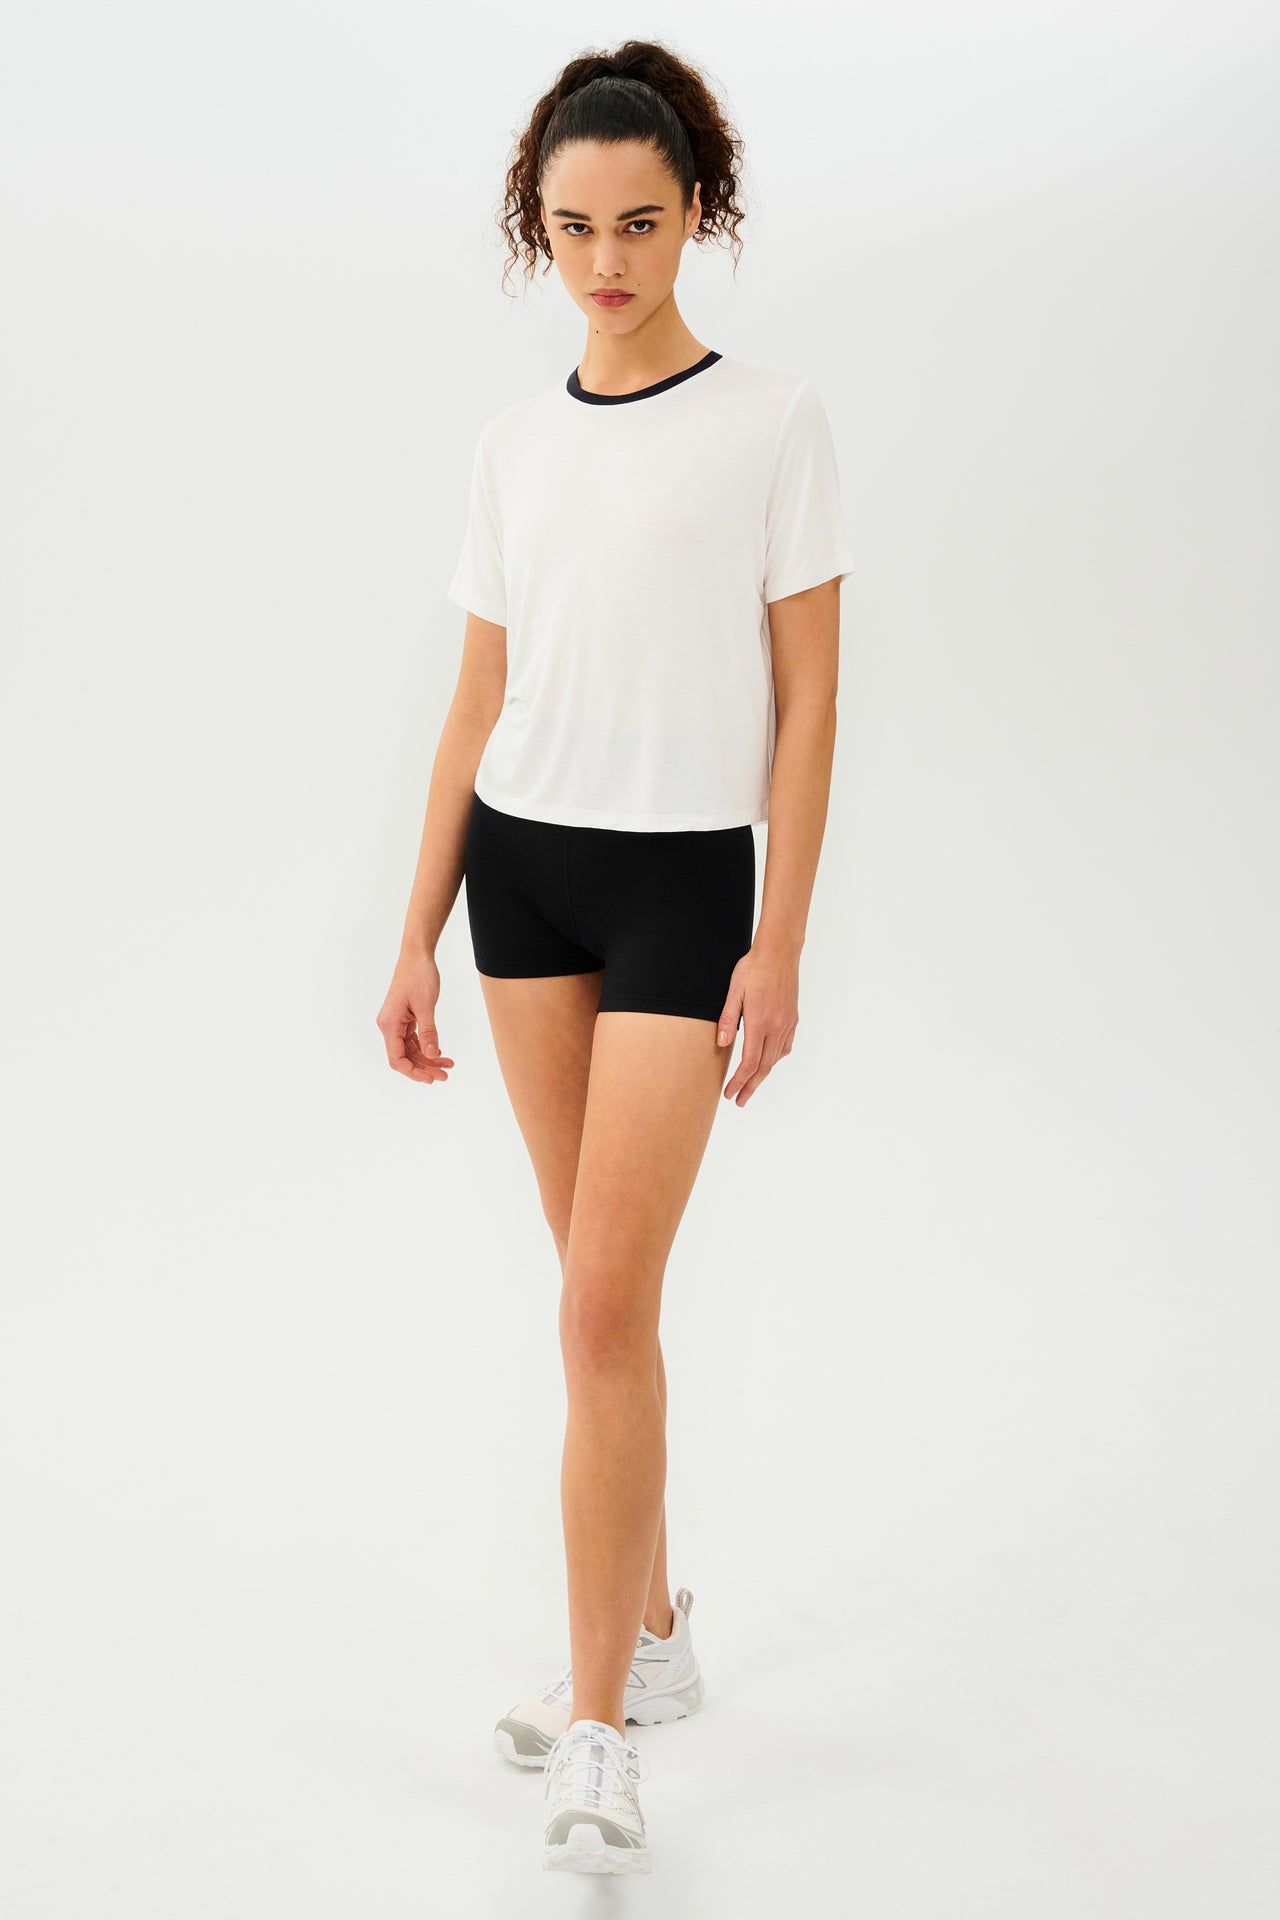 Full side view of girl wearing white cropped short sleeve t-shirt with thin black neck hem and black bike shorts with white shoes